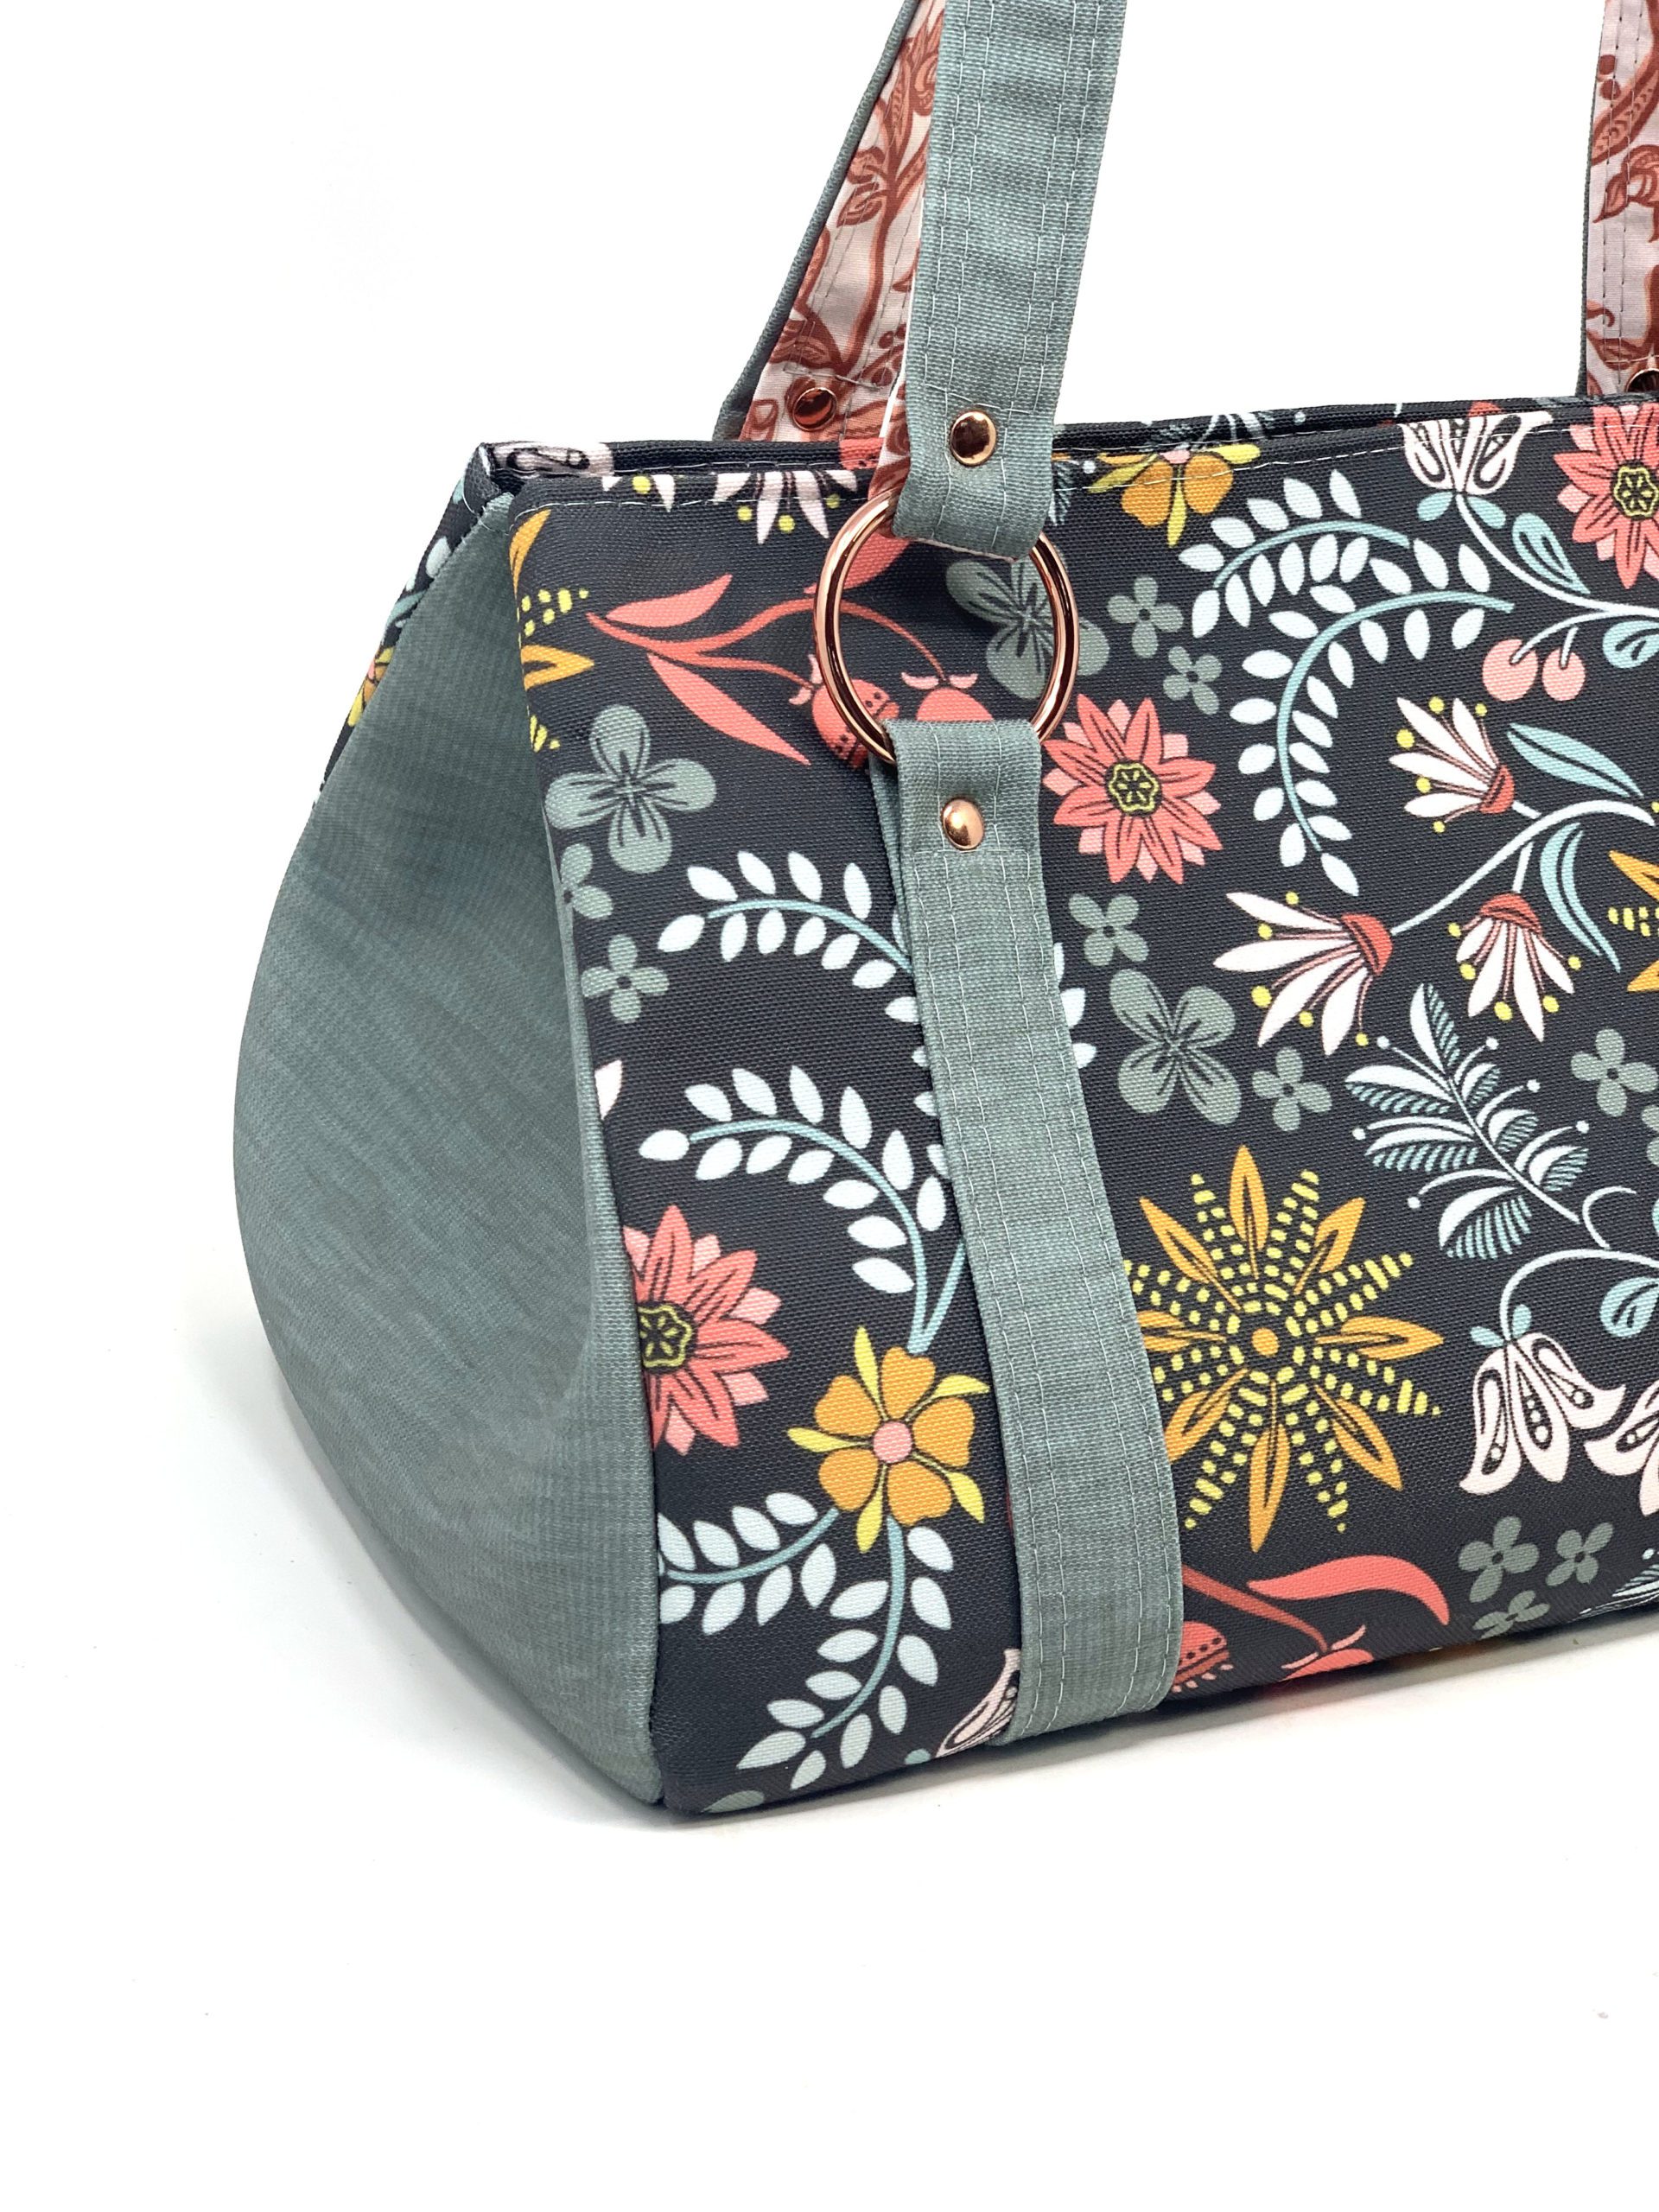 the Happy Handbag sewn in custom floral fabric with copper hardware